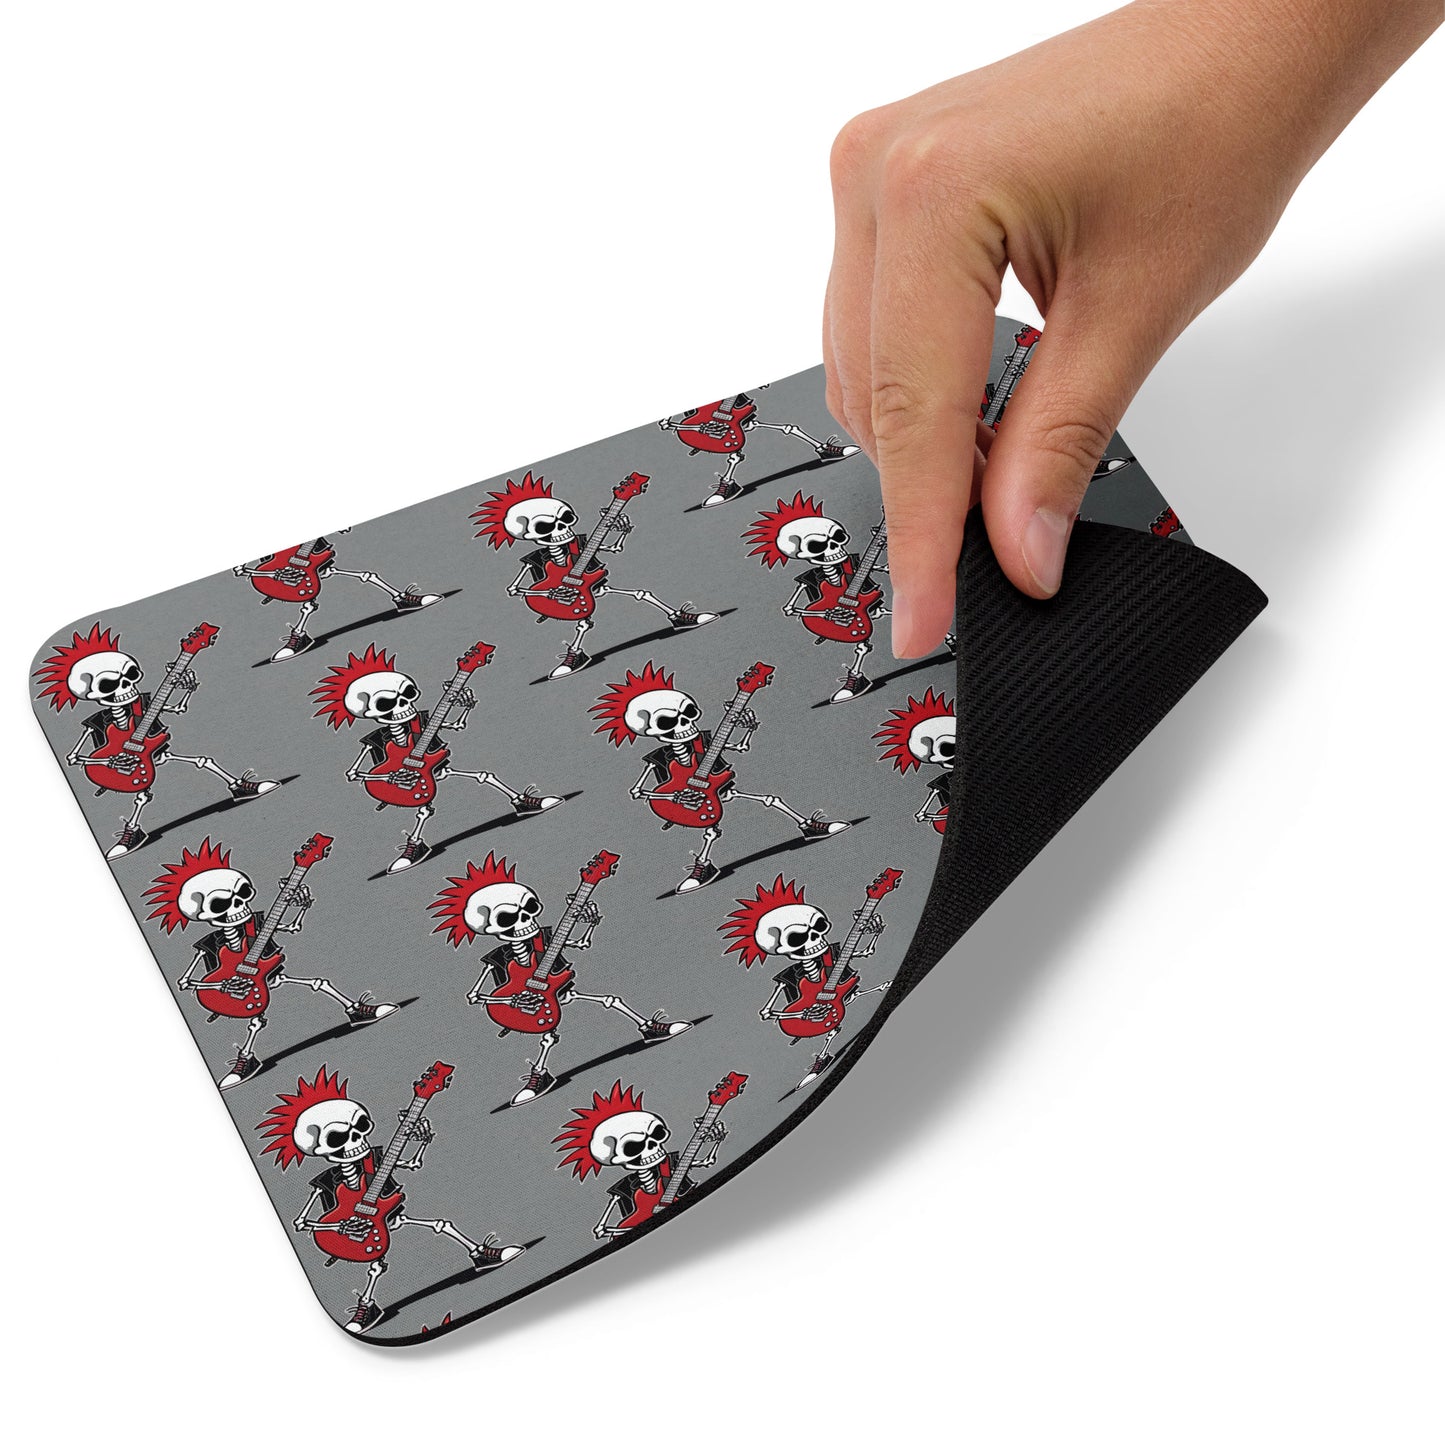 RED'S GUITAR MOUSE PAD